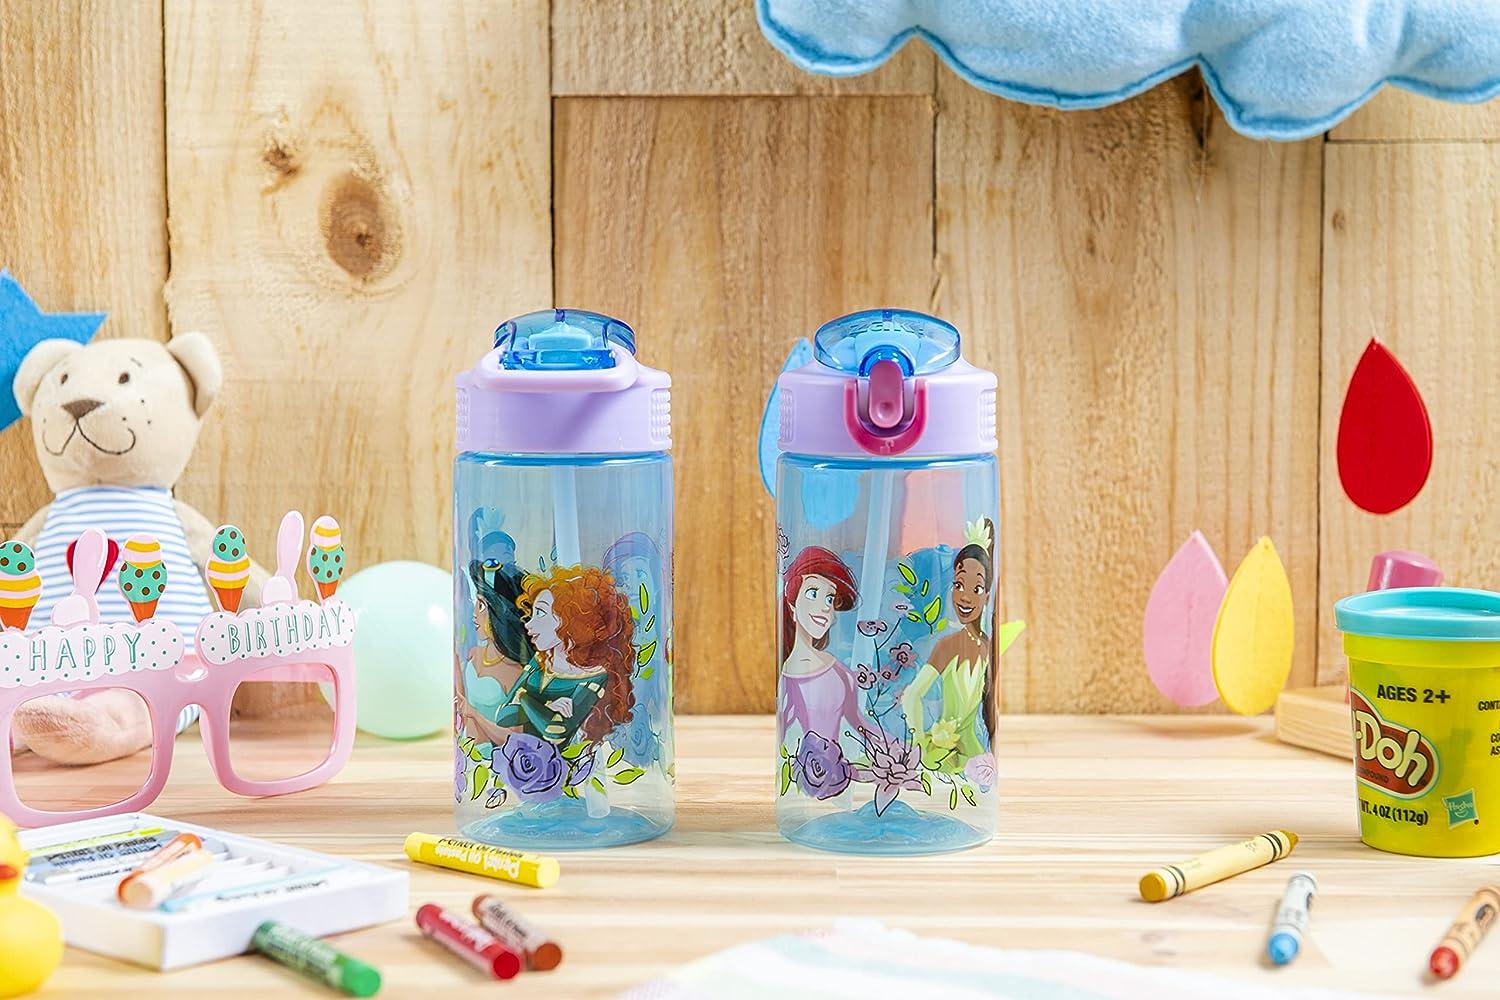 Zak Designs Disney Lilo and Stitch Kids Water Bottle with Spout Cover and  Built-in Carrying Loop, Ma…See more Zak Designs Disney Lilo and Stitch Kids